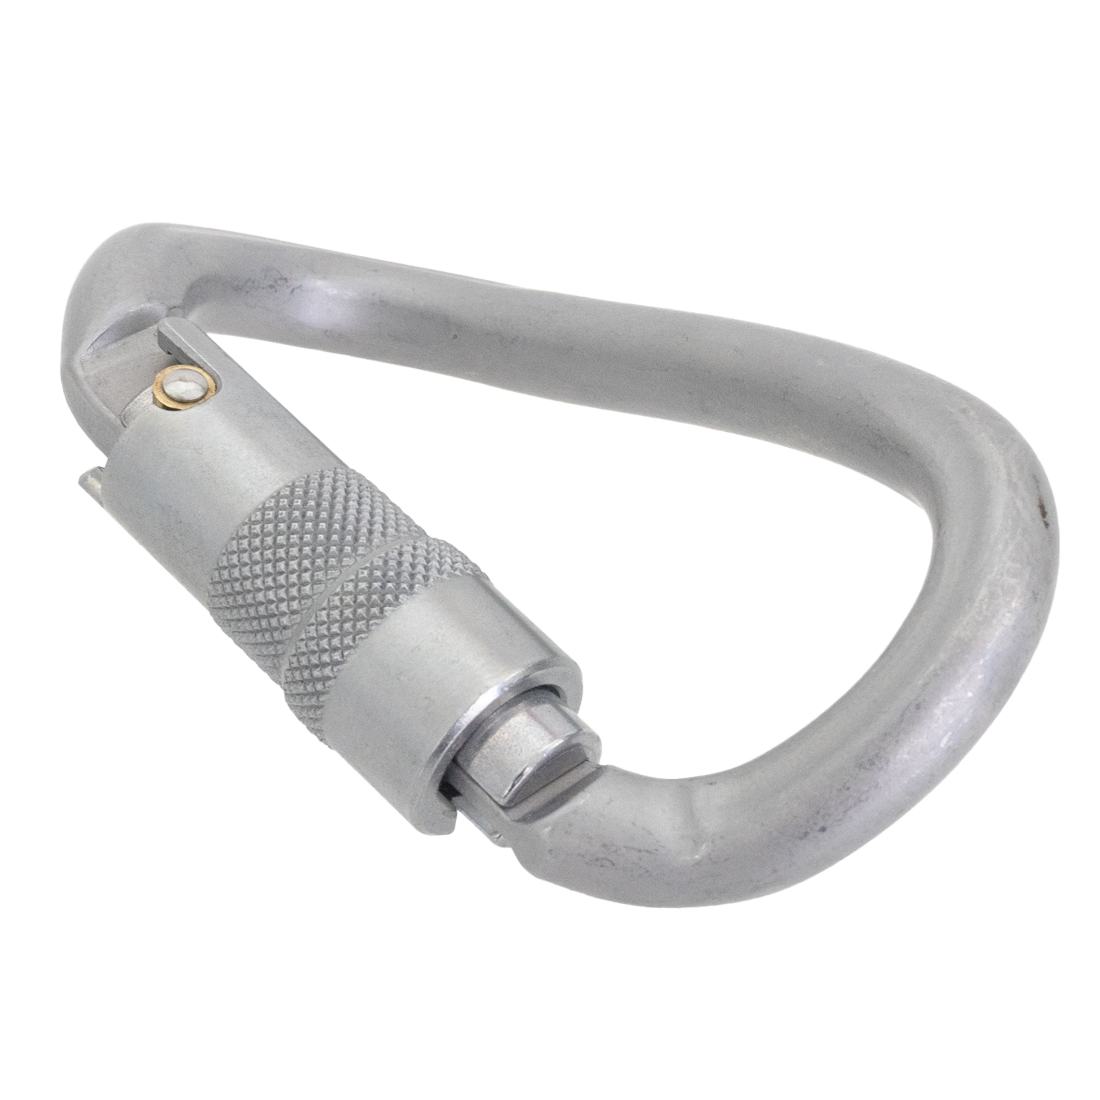 KONG DNA Carabiner - Ovalone Autoblock ANSI Right Side View